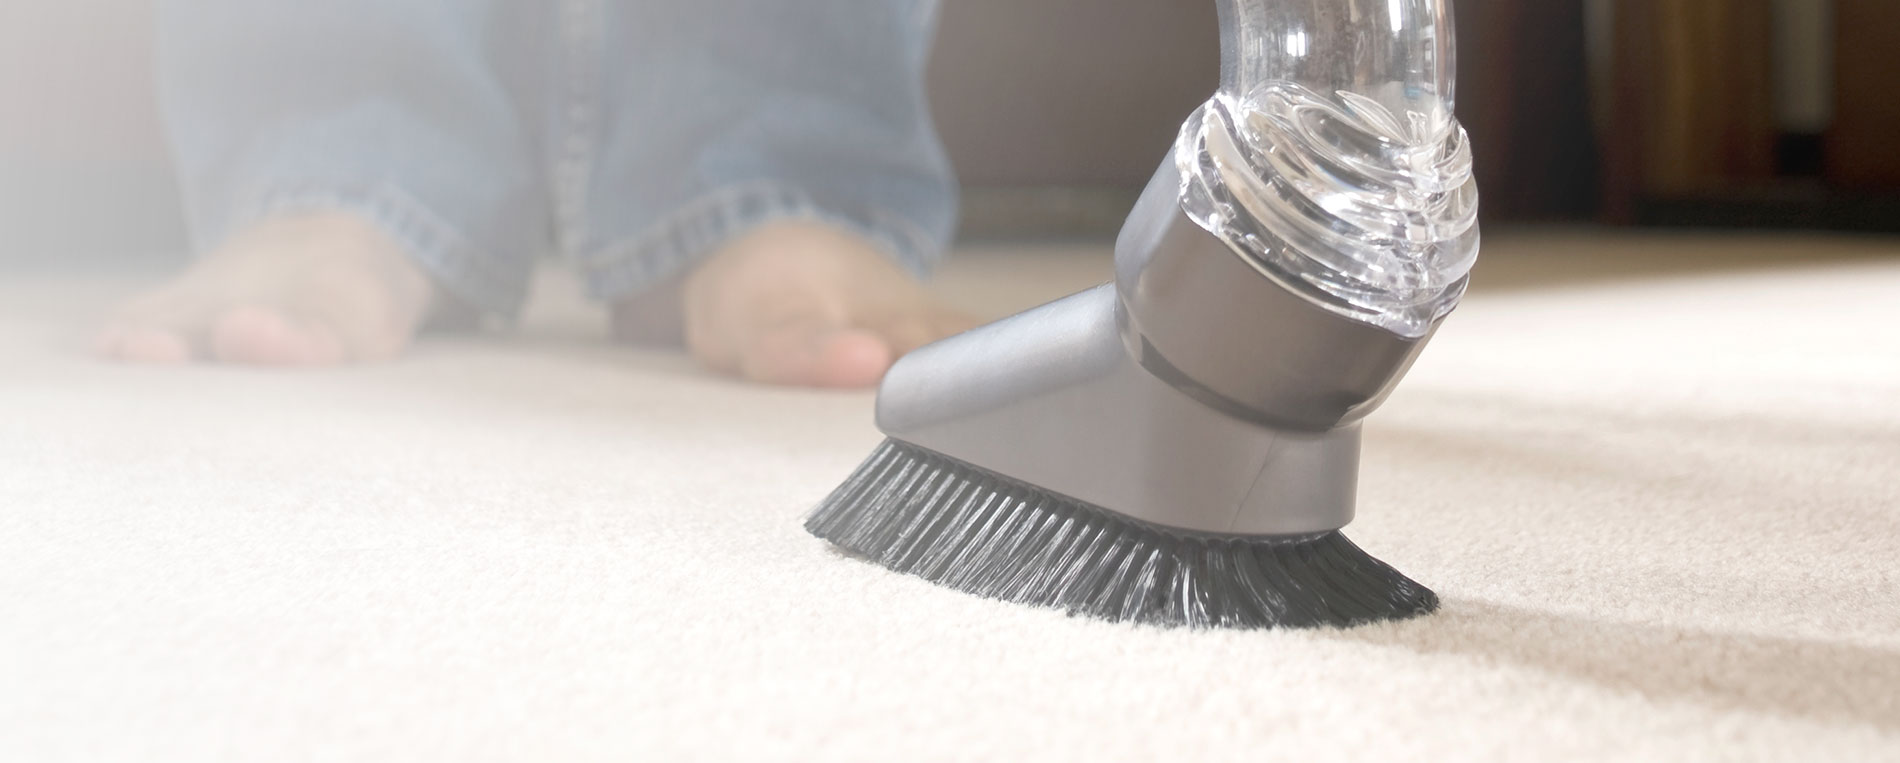 How You Can Save Time With Quality Carpet Cleaning Services